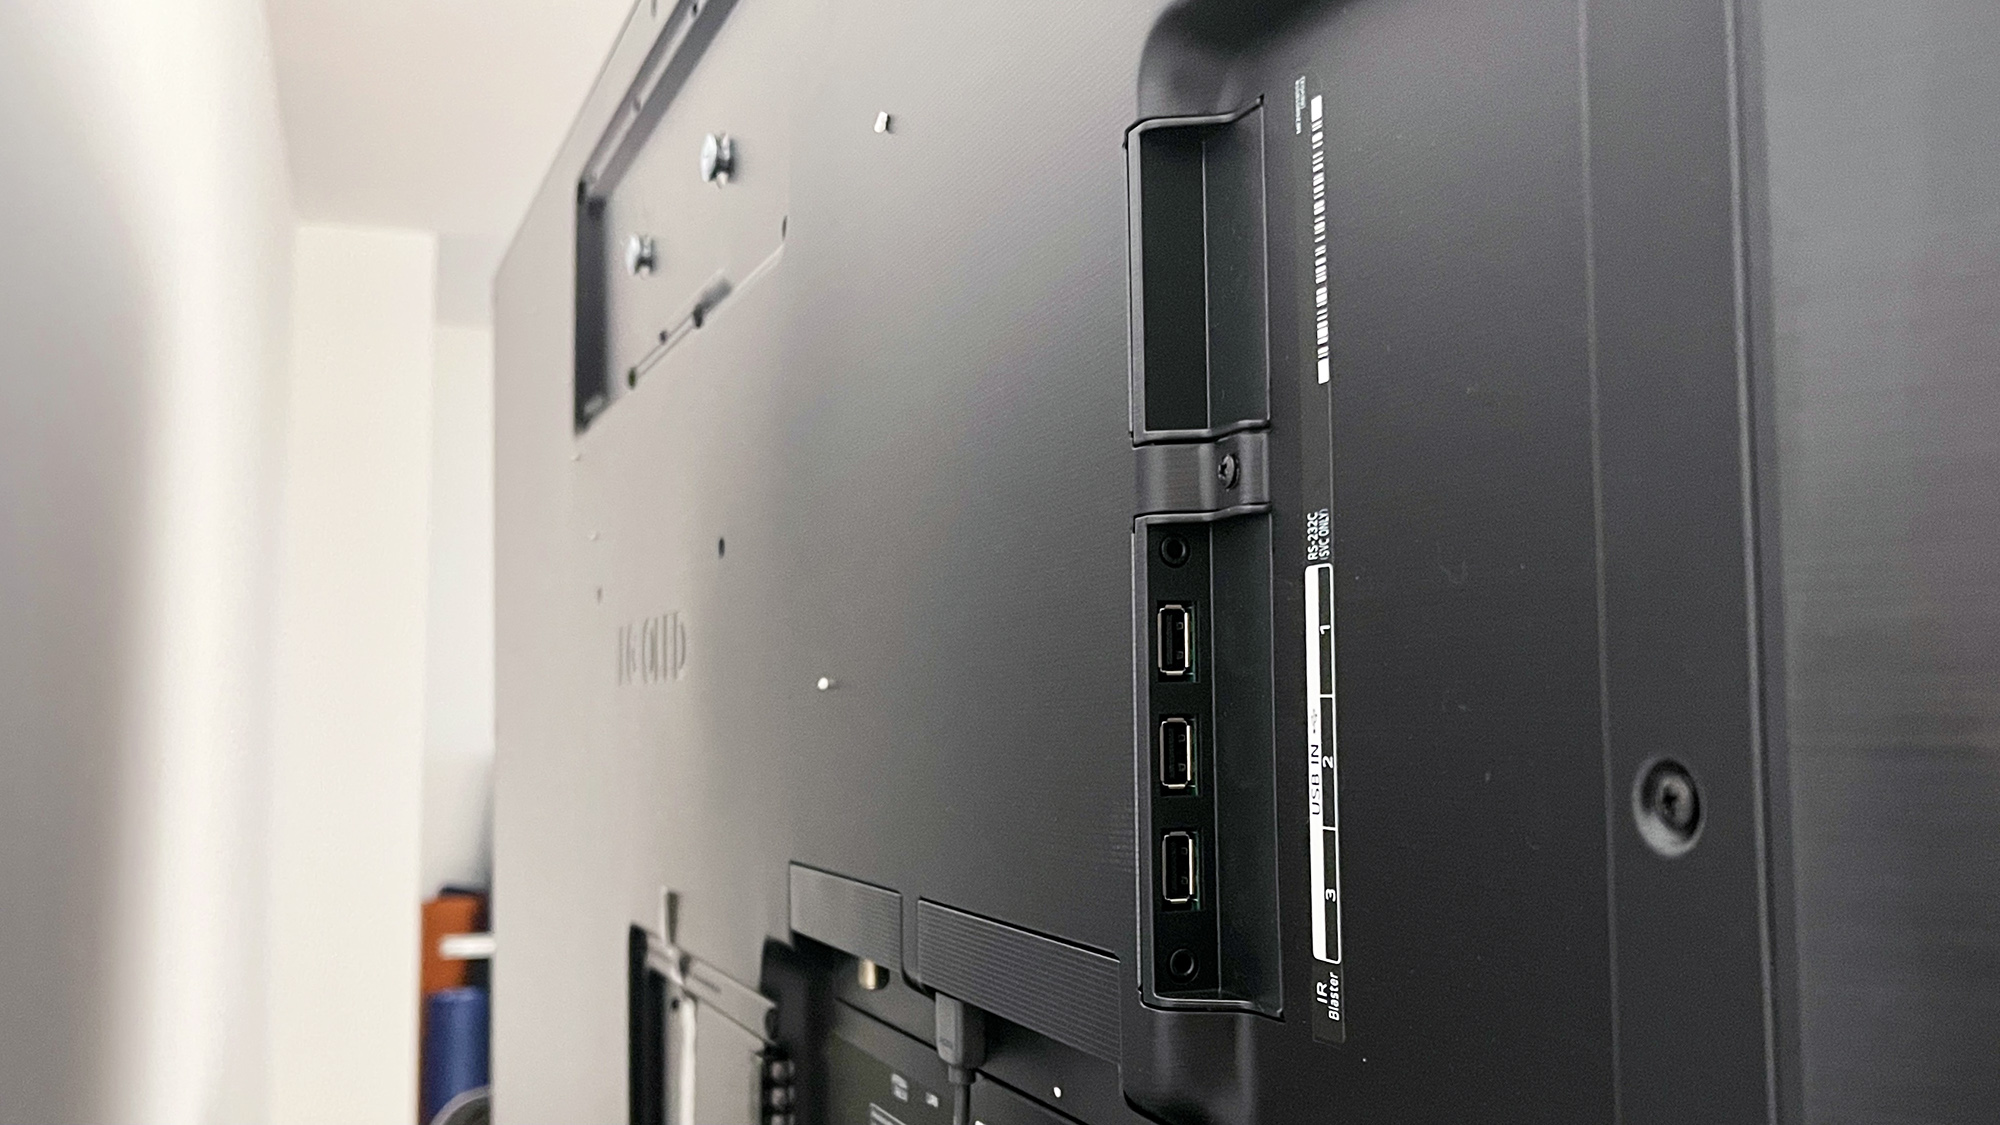 Kritisere Isolere Blind tillid TV ports explained: What all those HDMI, USB and other connections are for?  | Tom's Guide